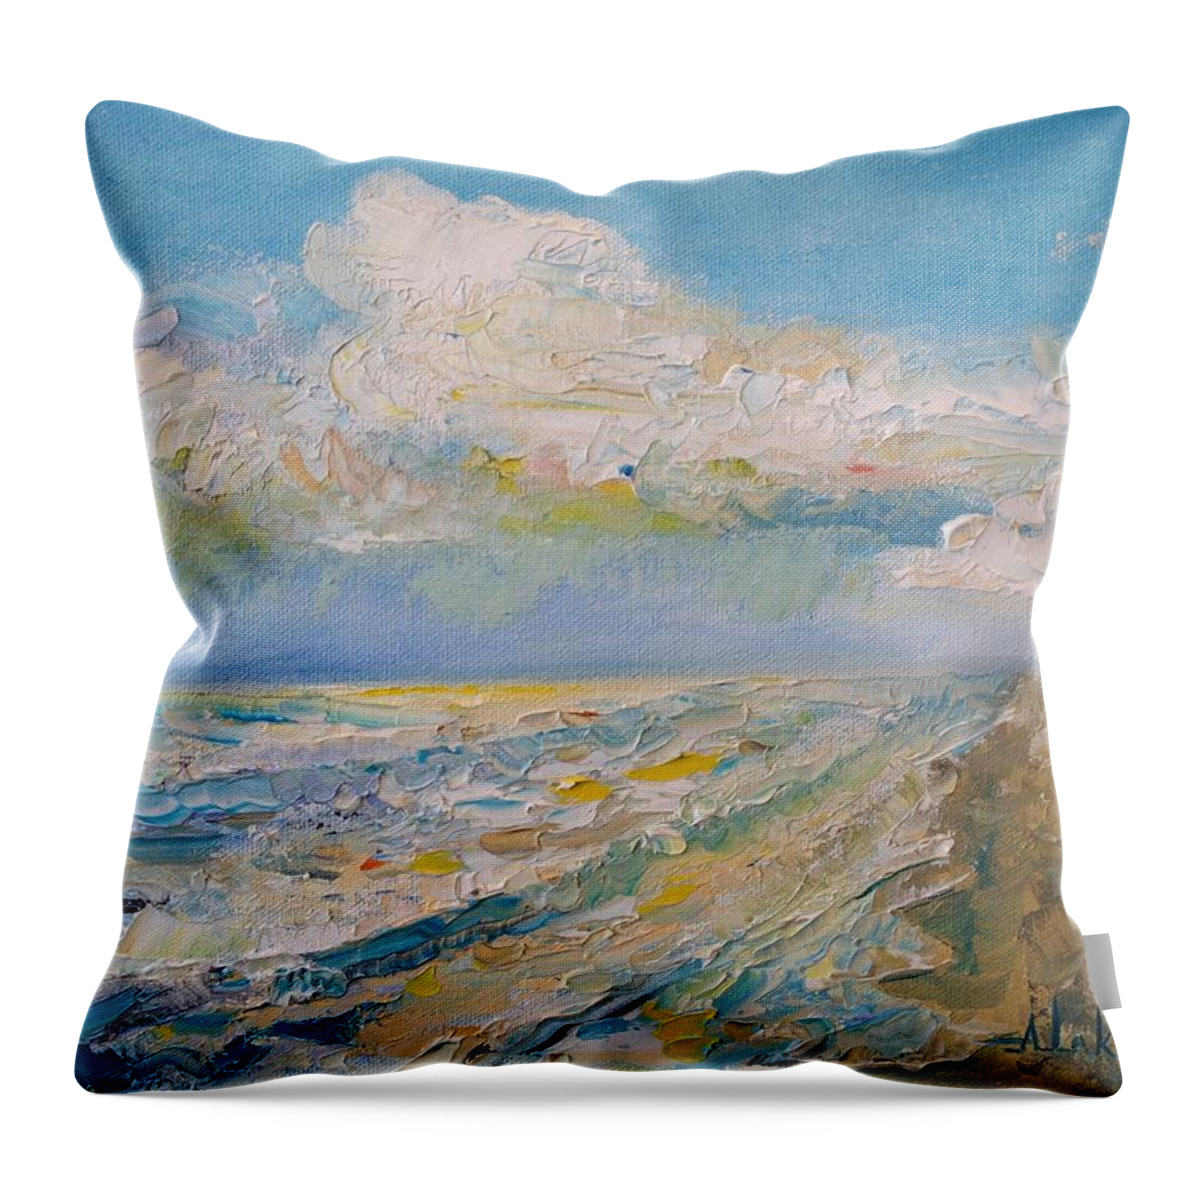 Seascape Throw Pillow featuring the painting Panama City Beach by Alan Lakin